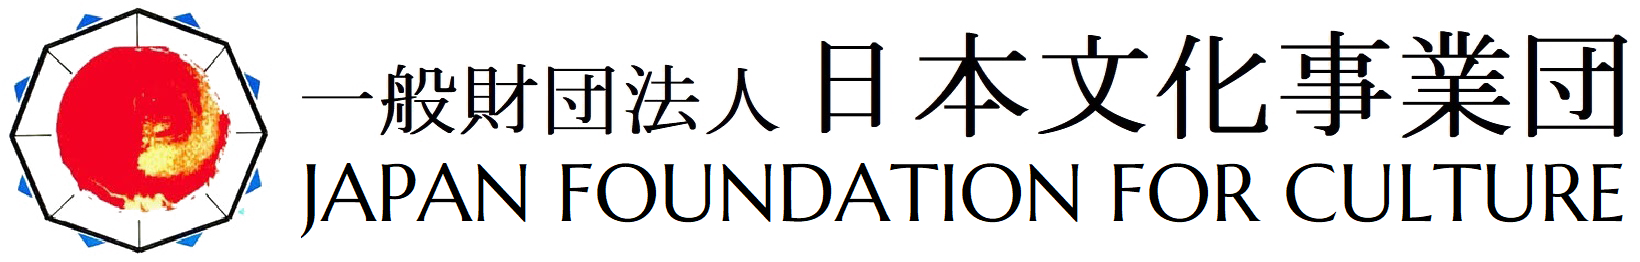 Japan Foundation for Culture